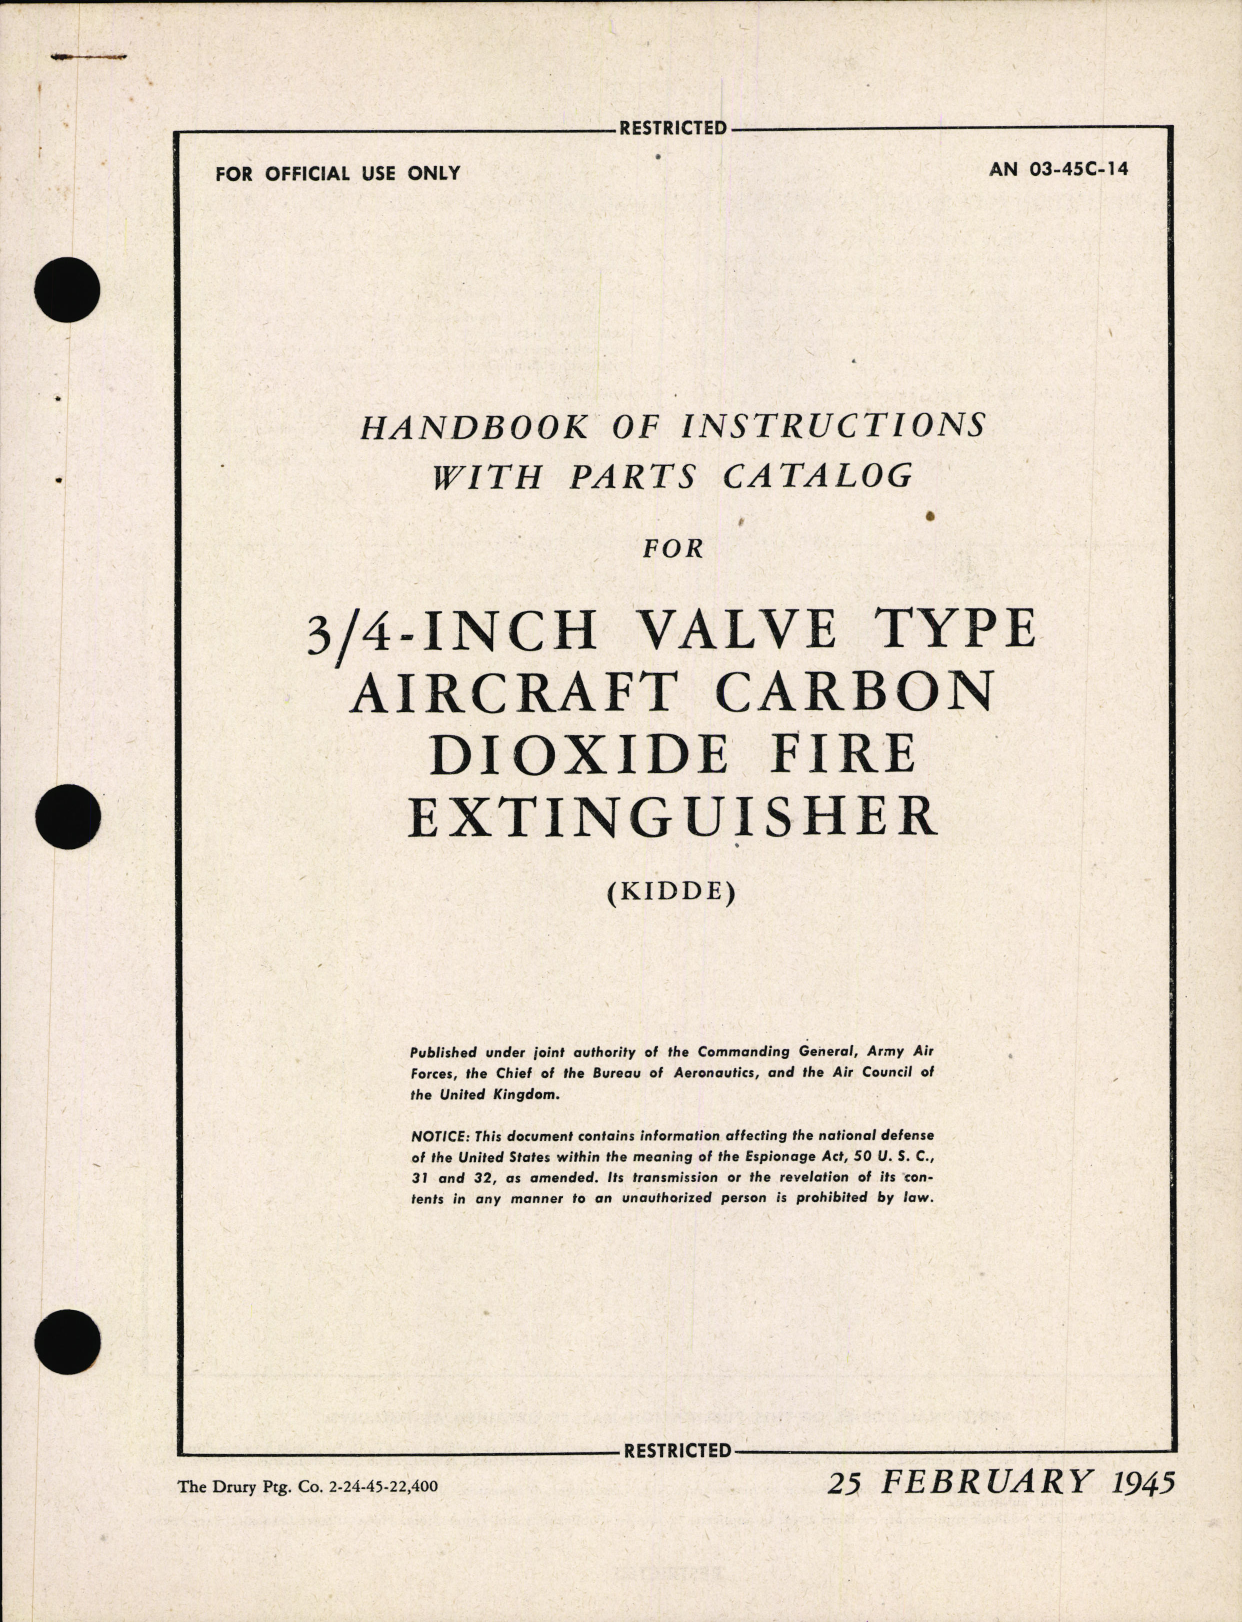 Sample page 1 from AirCorps Library document: Handbook of Instructions with Parts Catalog for 3/4 Inch Valve Type Aircraft Carbon Dioxide Fire Extinguisher